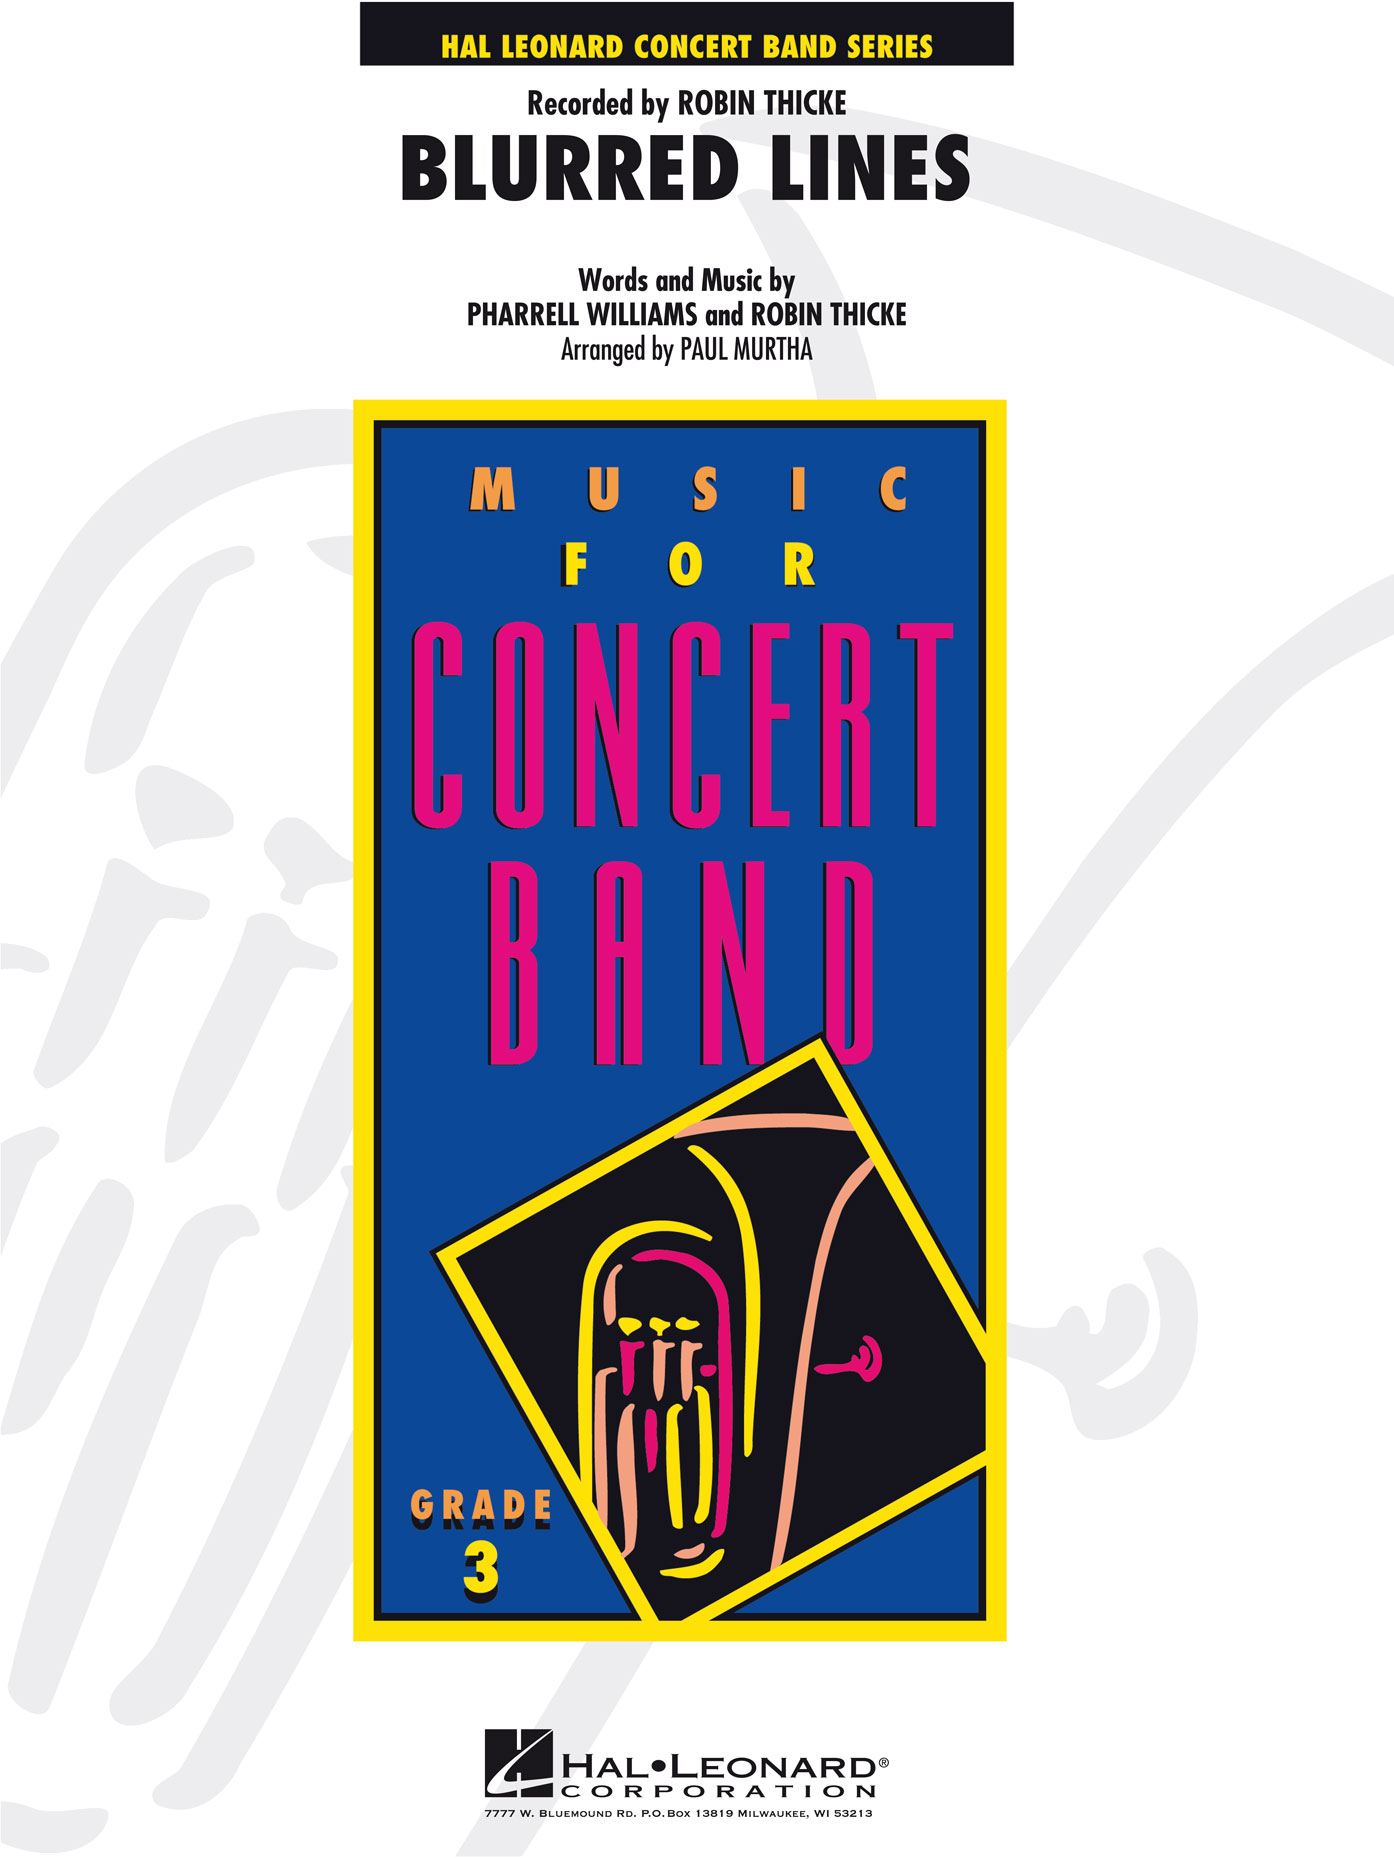 Pharrell Williams Robin Thicke: Blurred Lines: Concert Band: Score